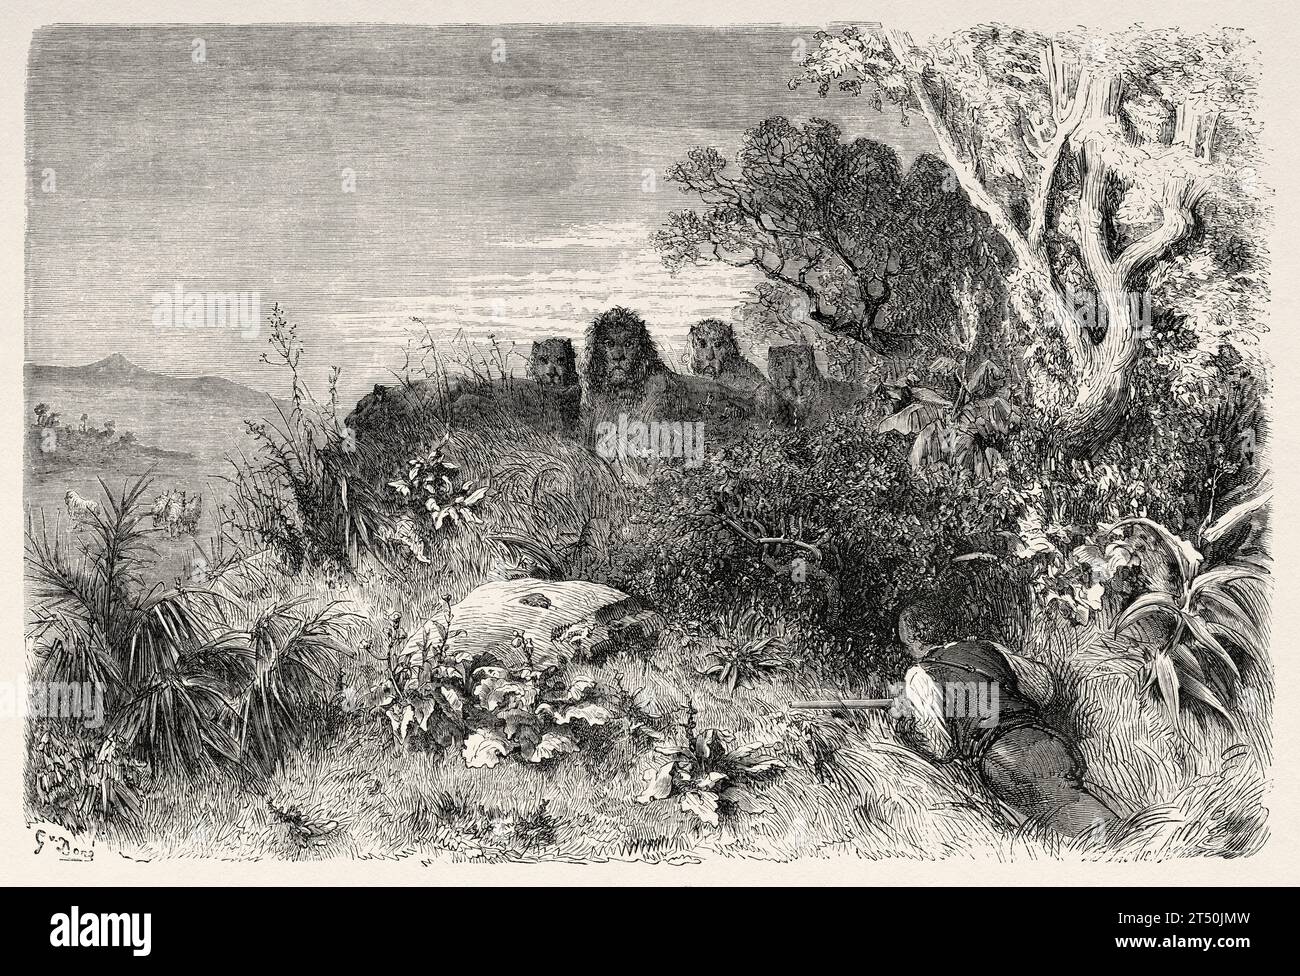 Lion Hunting. Africa. Adventures and Hunts of the Traveler Charles John Andersson in Southern Africa from 1850 to 1860. Old 19th century illustration by Gustave Doré (1832 - 1883) from Le Tour du Monde 1860 Stock Photo